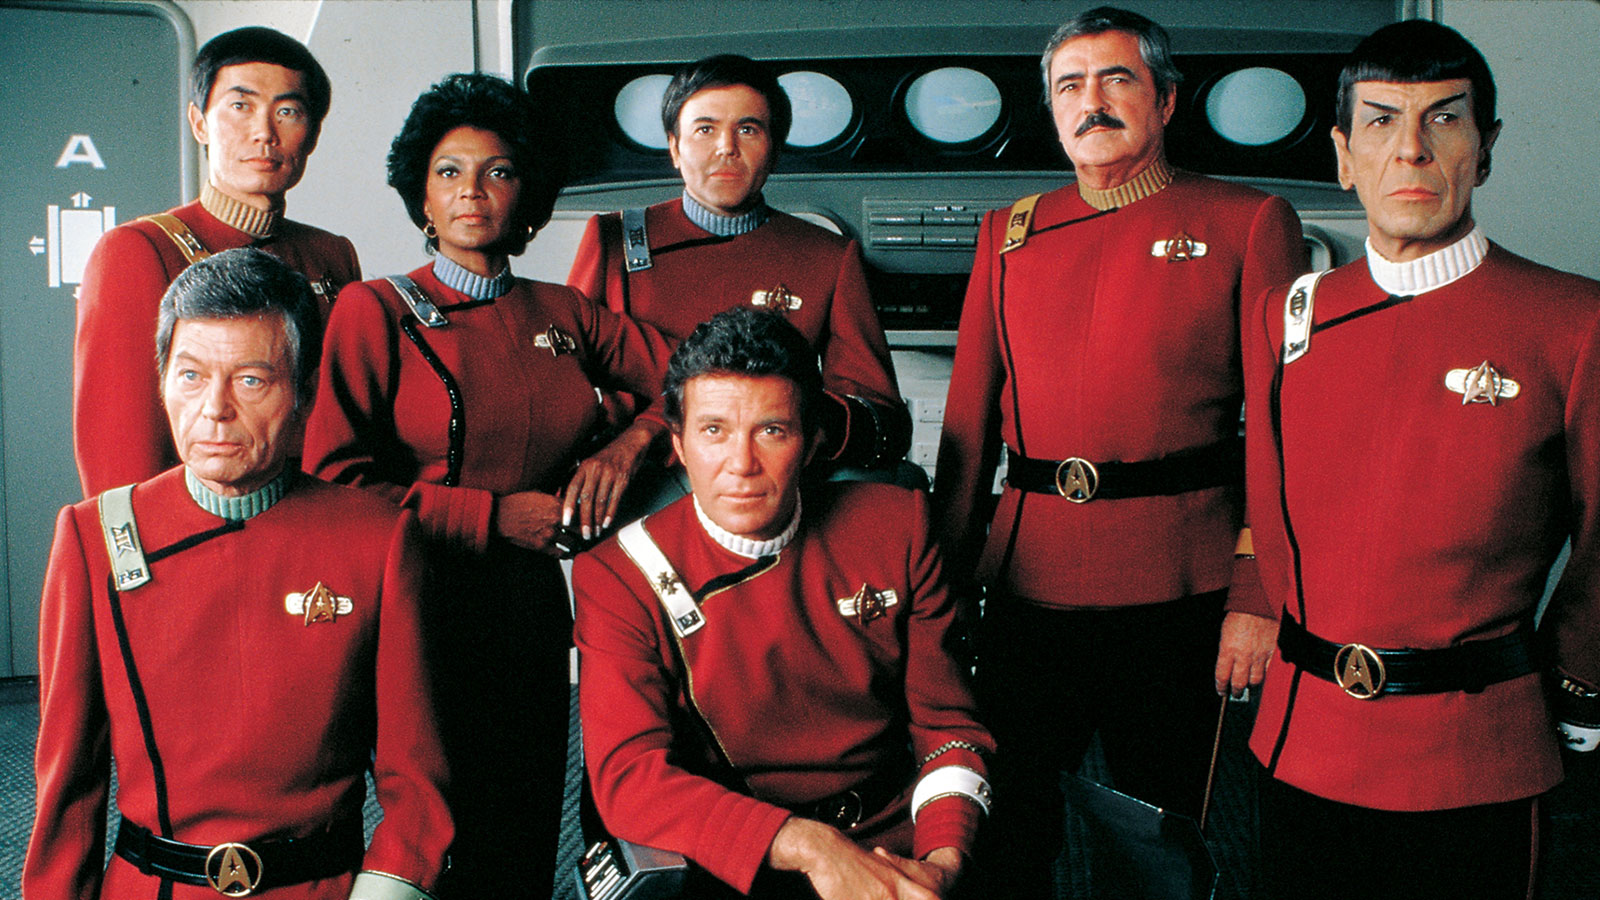 Star Trek II: The Wrath of Khan is headed back to the big screen this fall to celebrate 40th anniversary